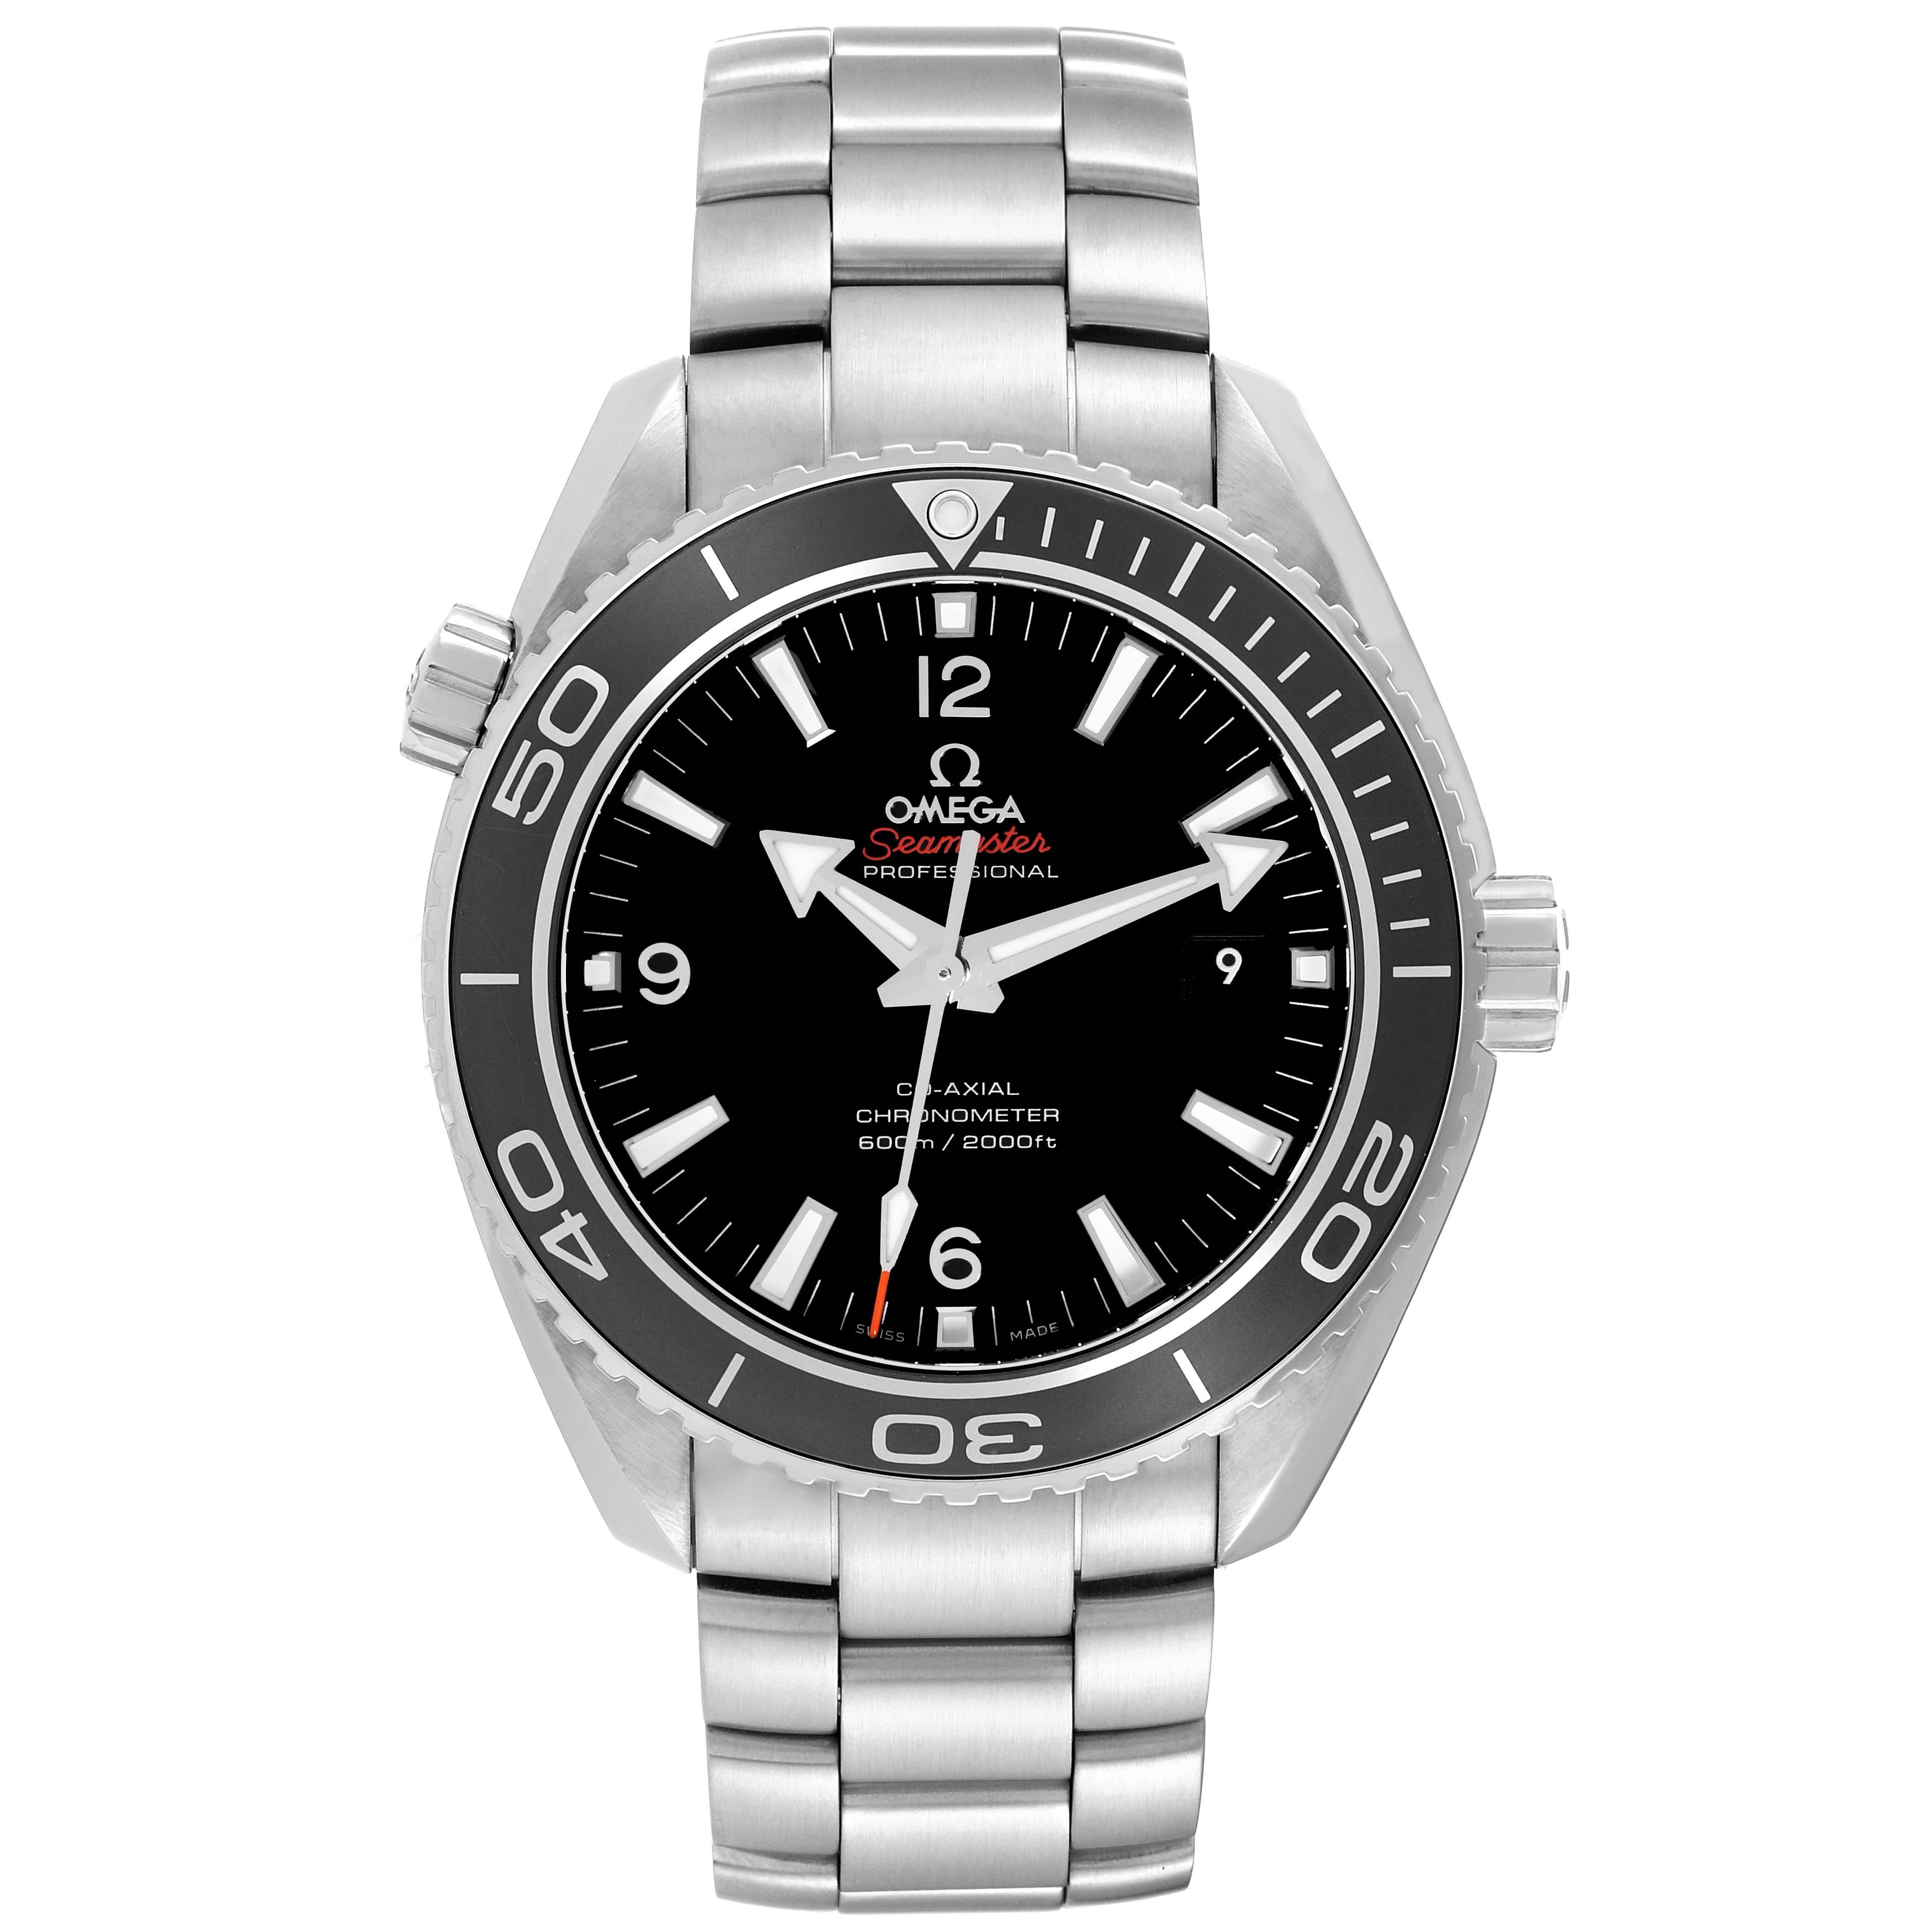 Omega Seamaster Planet Ocean 600M Steel Mens Watch 232.30.46.21.01.001 Card In Excellent Condition For Sale In Atlanta, GA